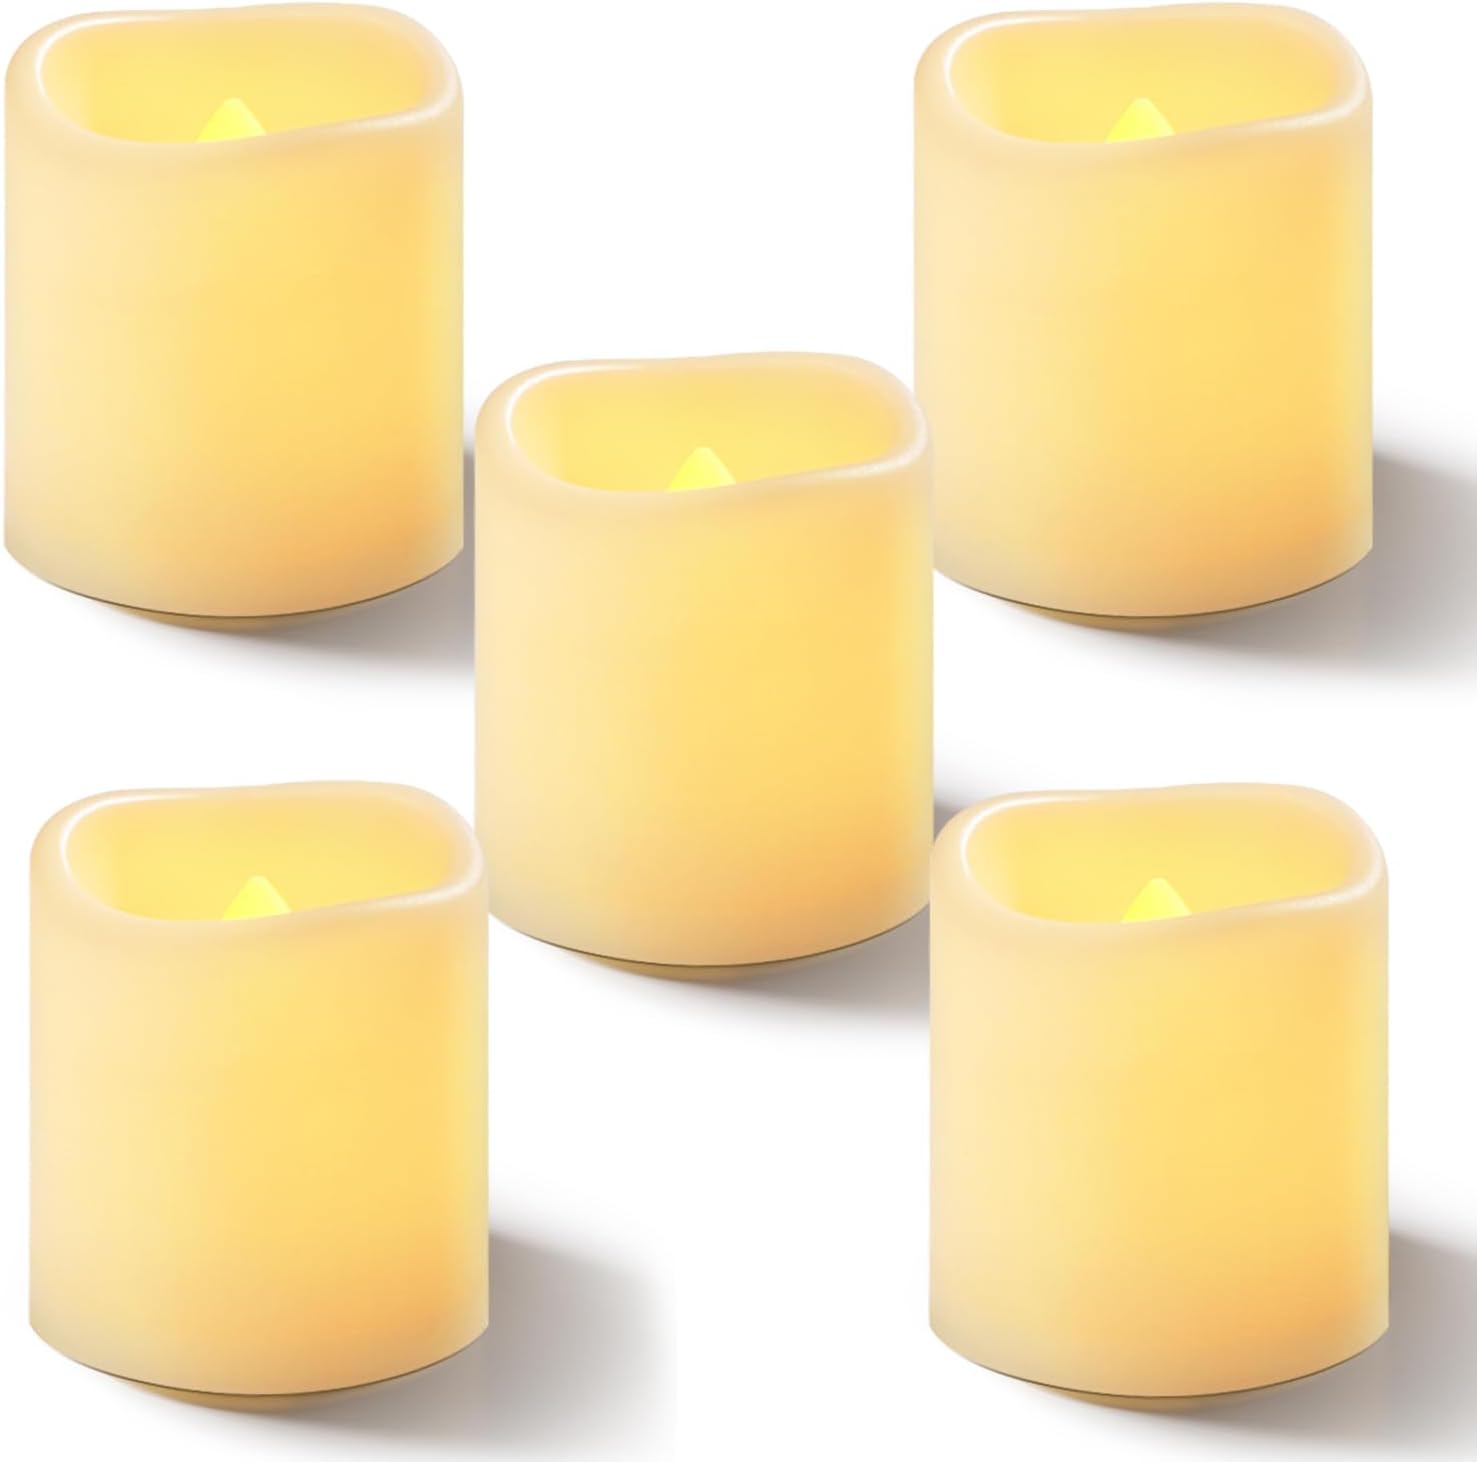 Homemory 12Pack Flickering Flameless Votive Candles, 200+Hour Electric Fake Candles, Battery Operated LED Tealight for Wedding, Outdoor, Table, Festival (Warm White,Battery Included)